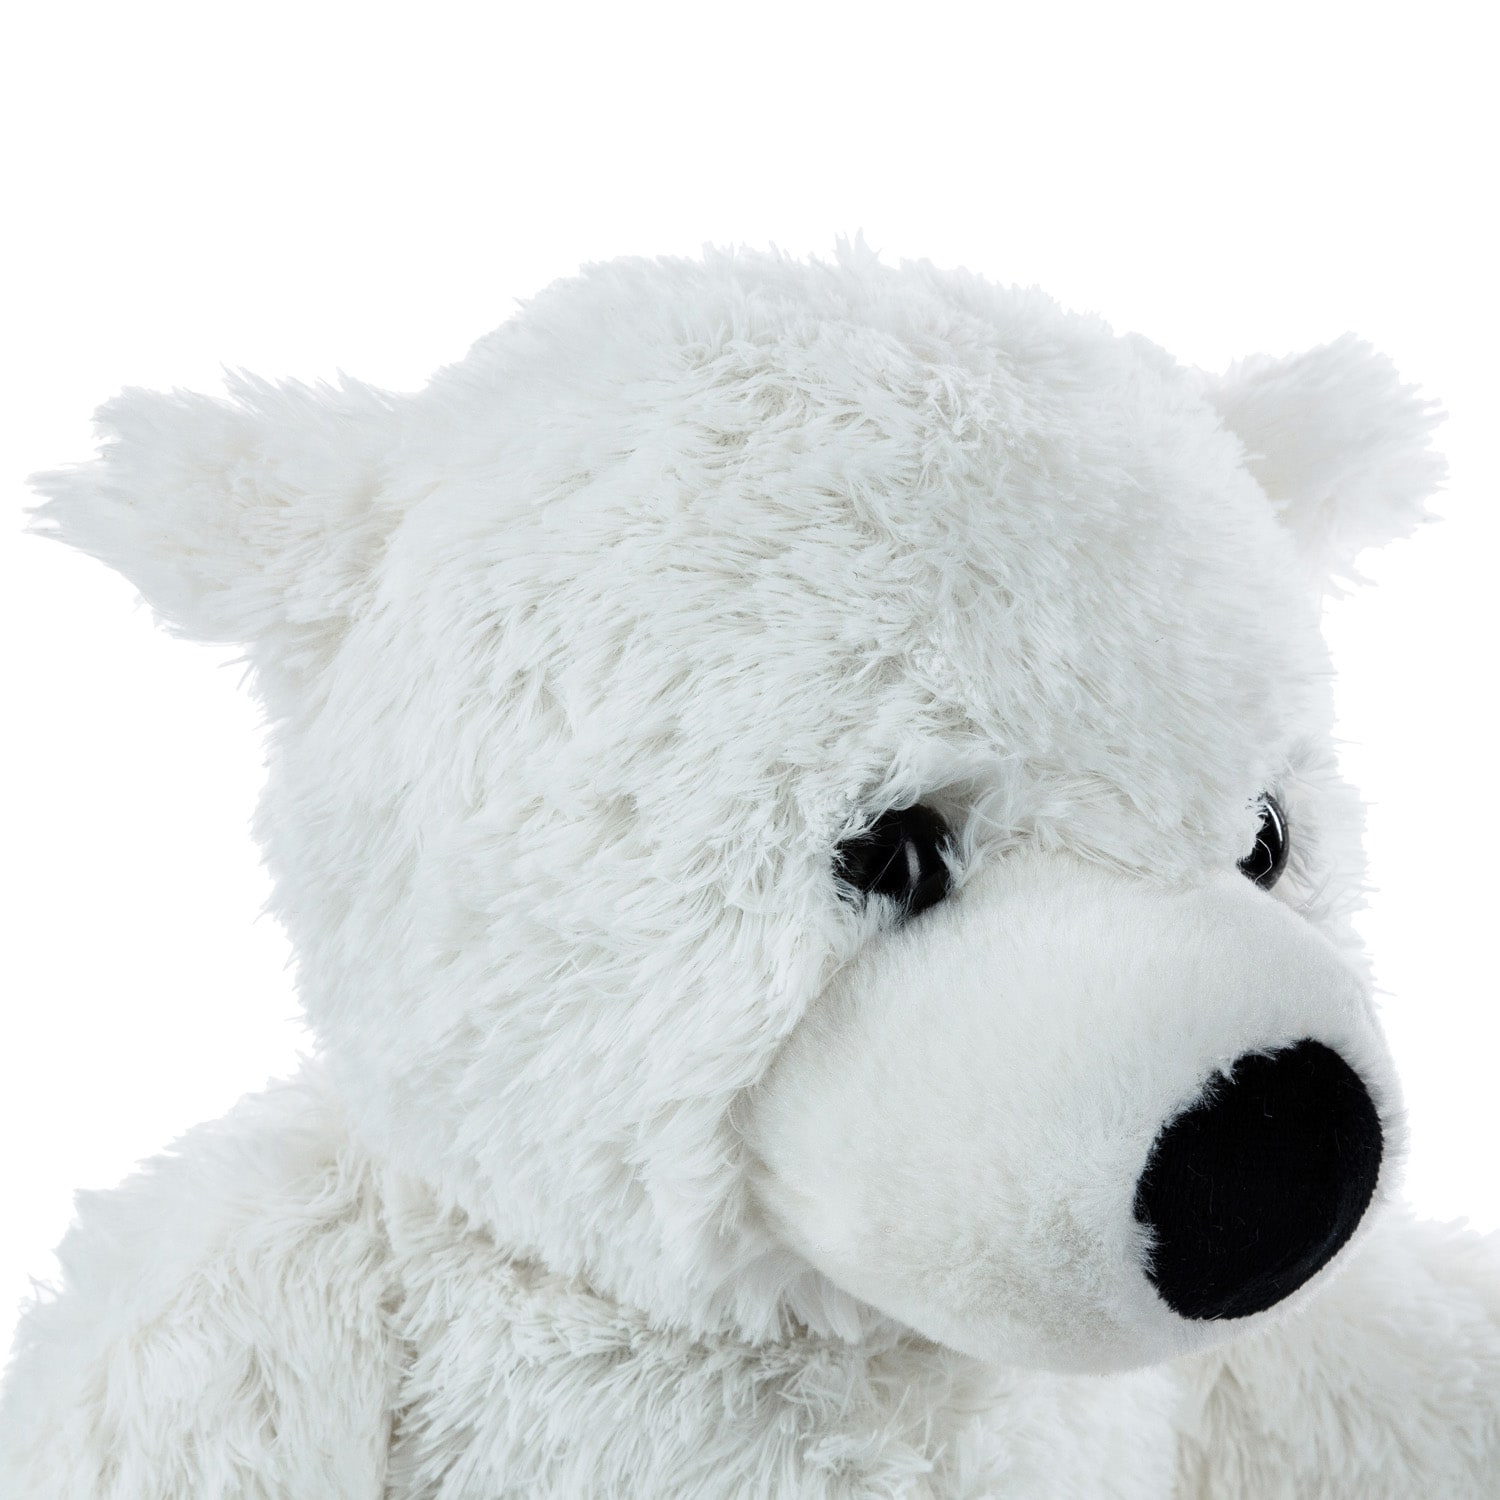 Peluche ours blanc - h. 29